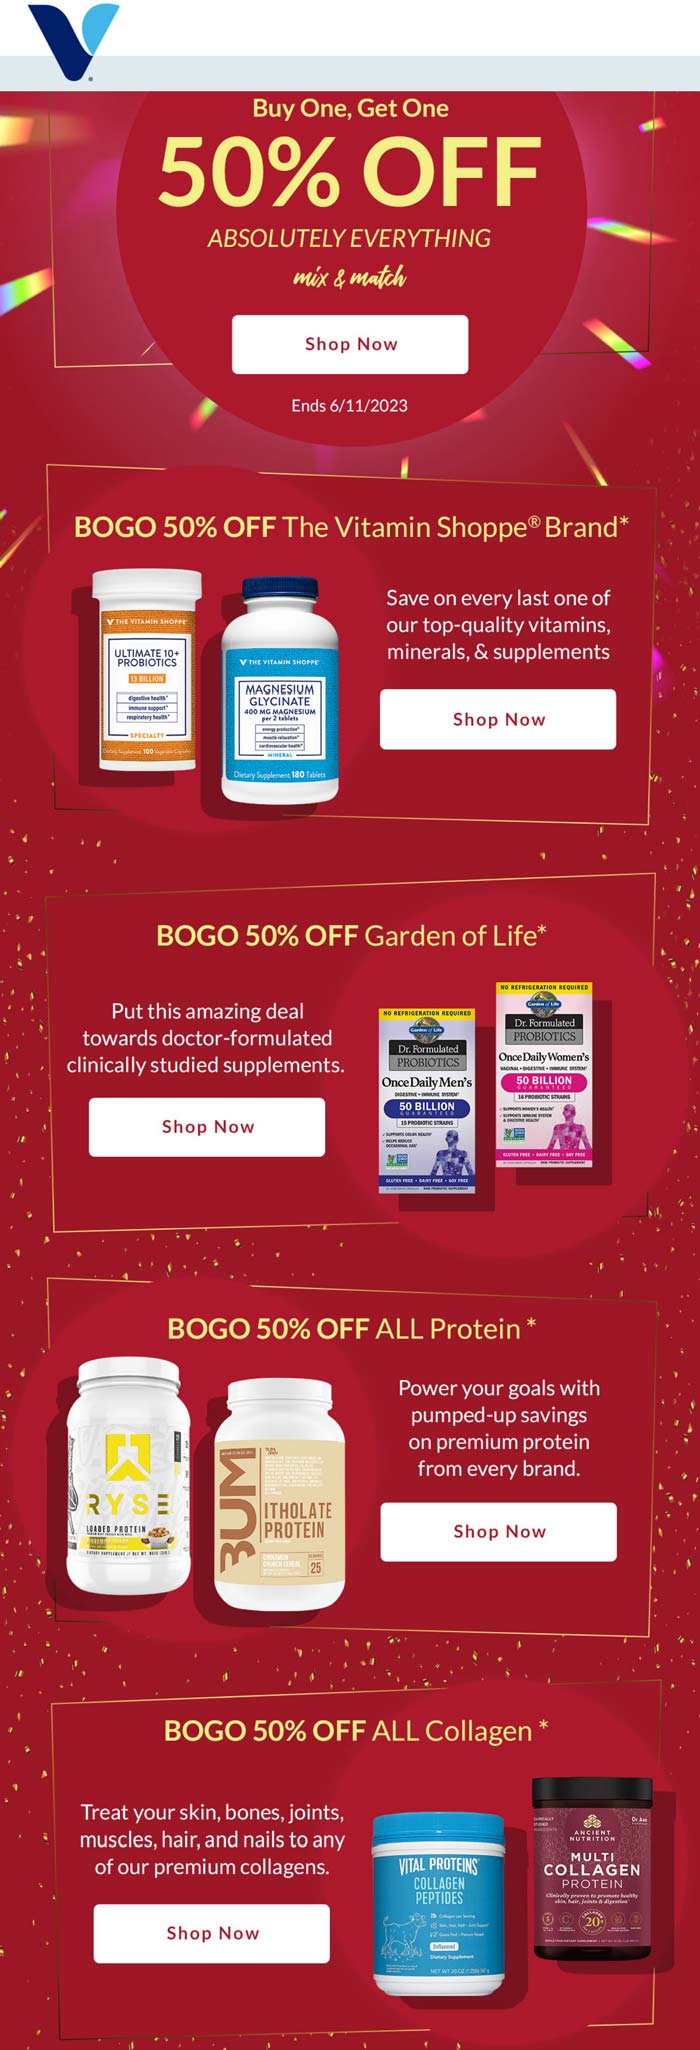 Vitamin Shoppe stores Coupon  Second item 50% on all brand items at Vitamin Shoppe #vitaminshoppe 